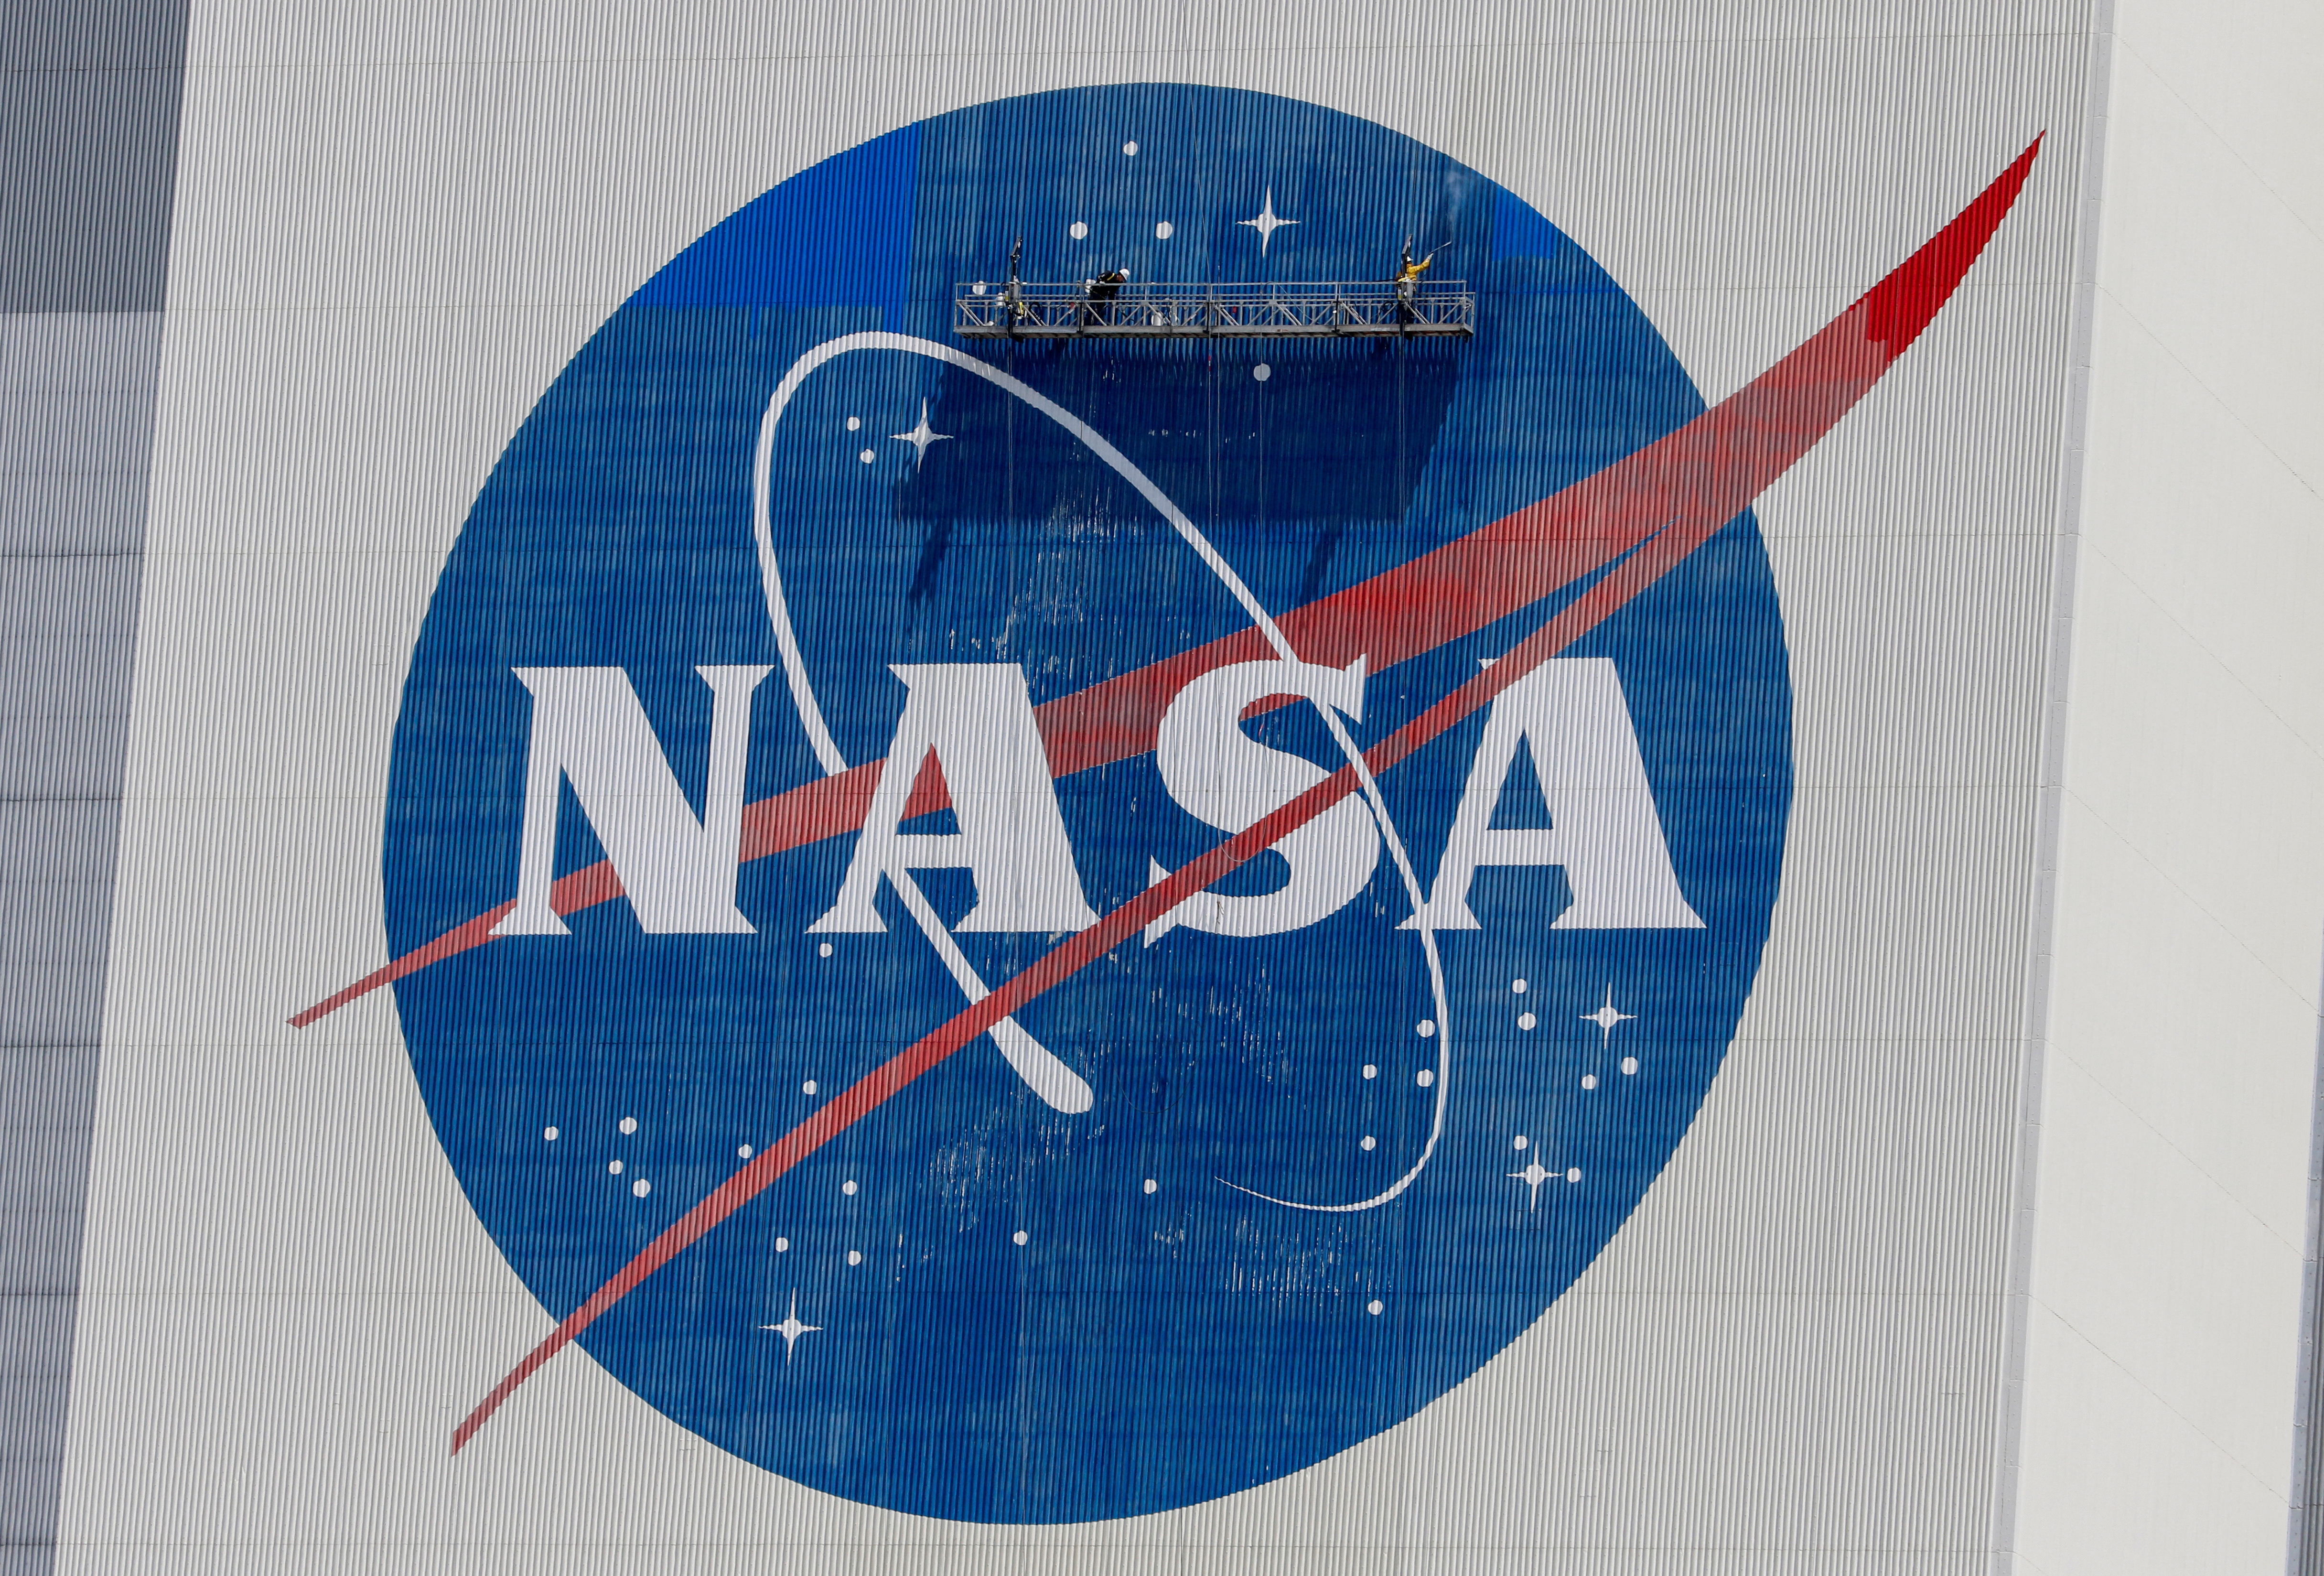 FILE PHOTO: Workers pressure wash the logo of NASA on the Vehicle Assembly Building before SpaceX will send two NASA astronauts to the International Space Station aboard its Falcon 9 rocket, at the Kennedy Space Center in Cape Canaveral, Florida, U.S., May 19, 2020. REUTERS/Joe Skipper/File Photo